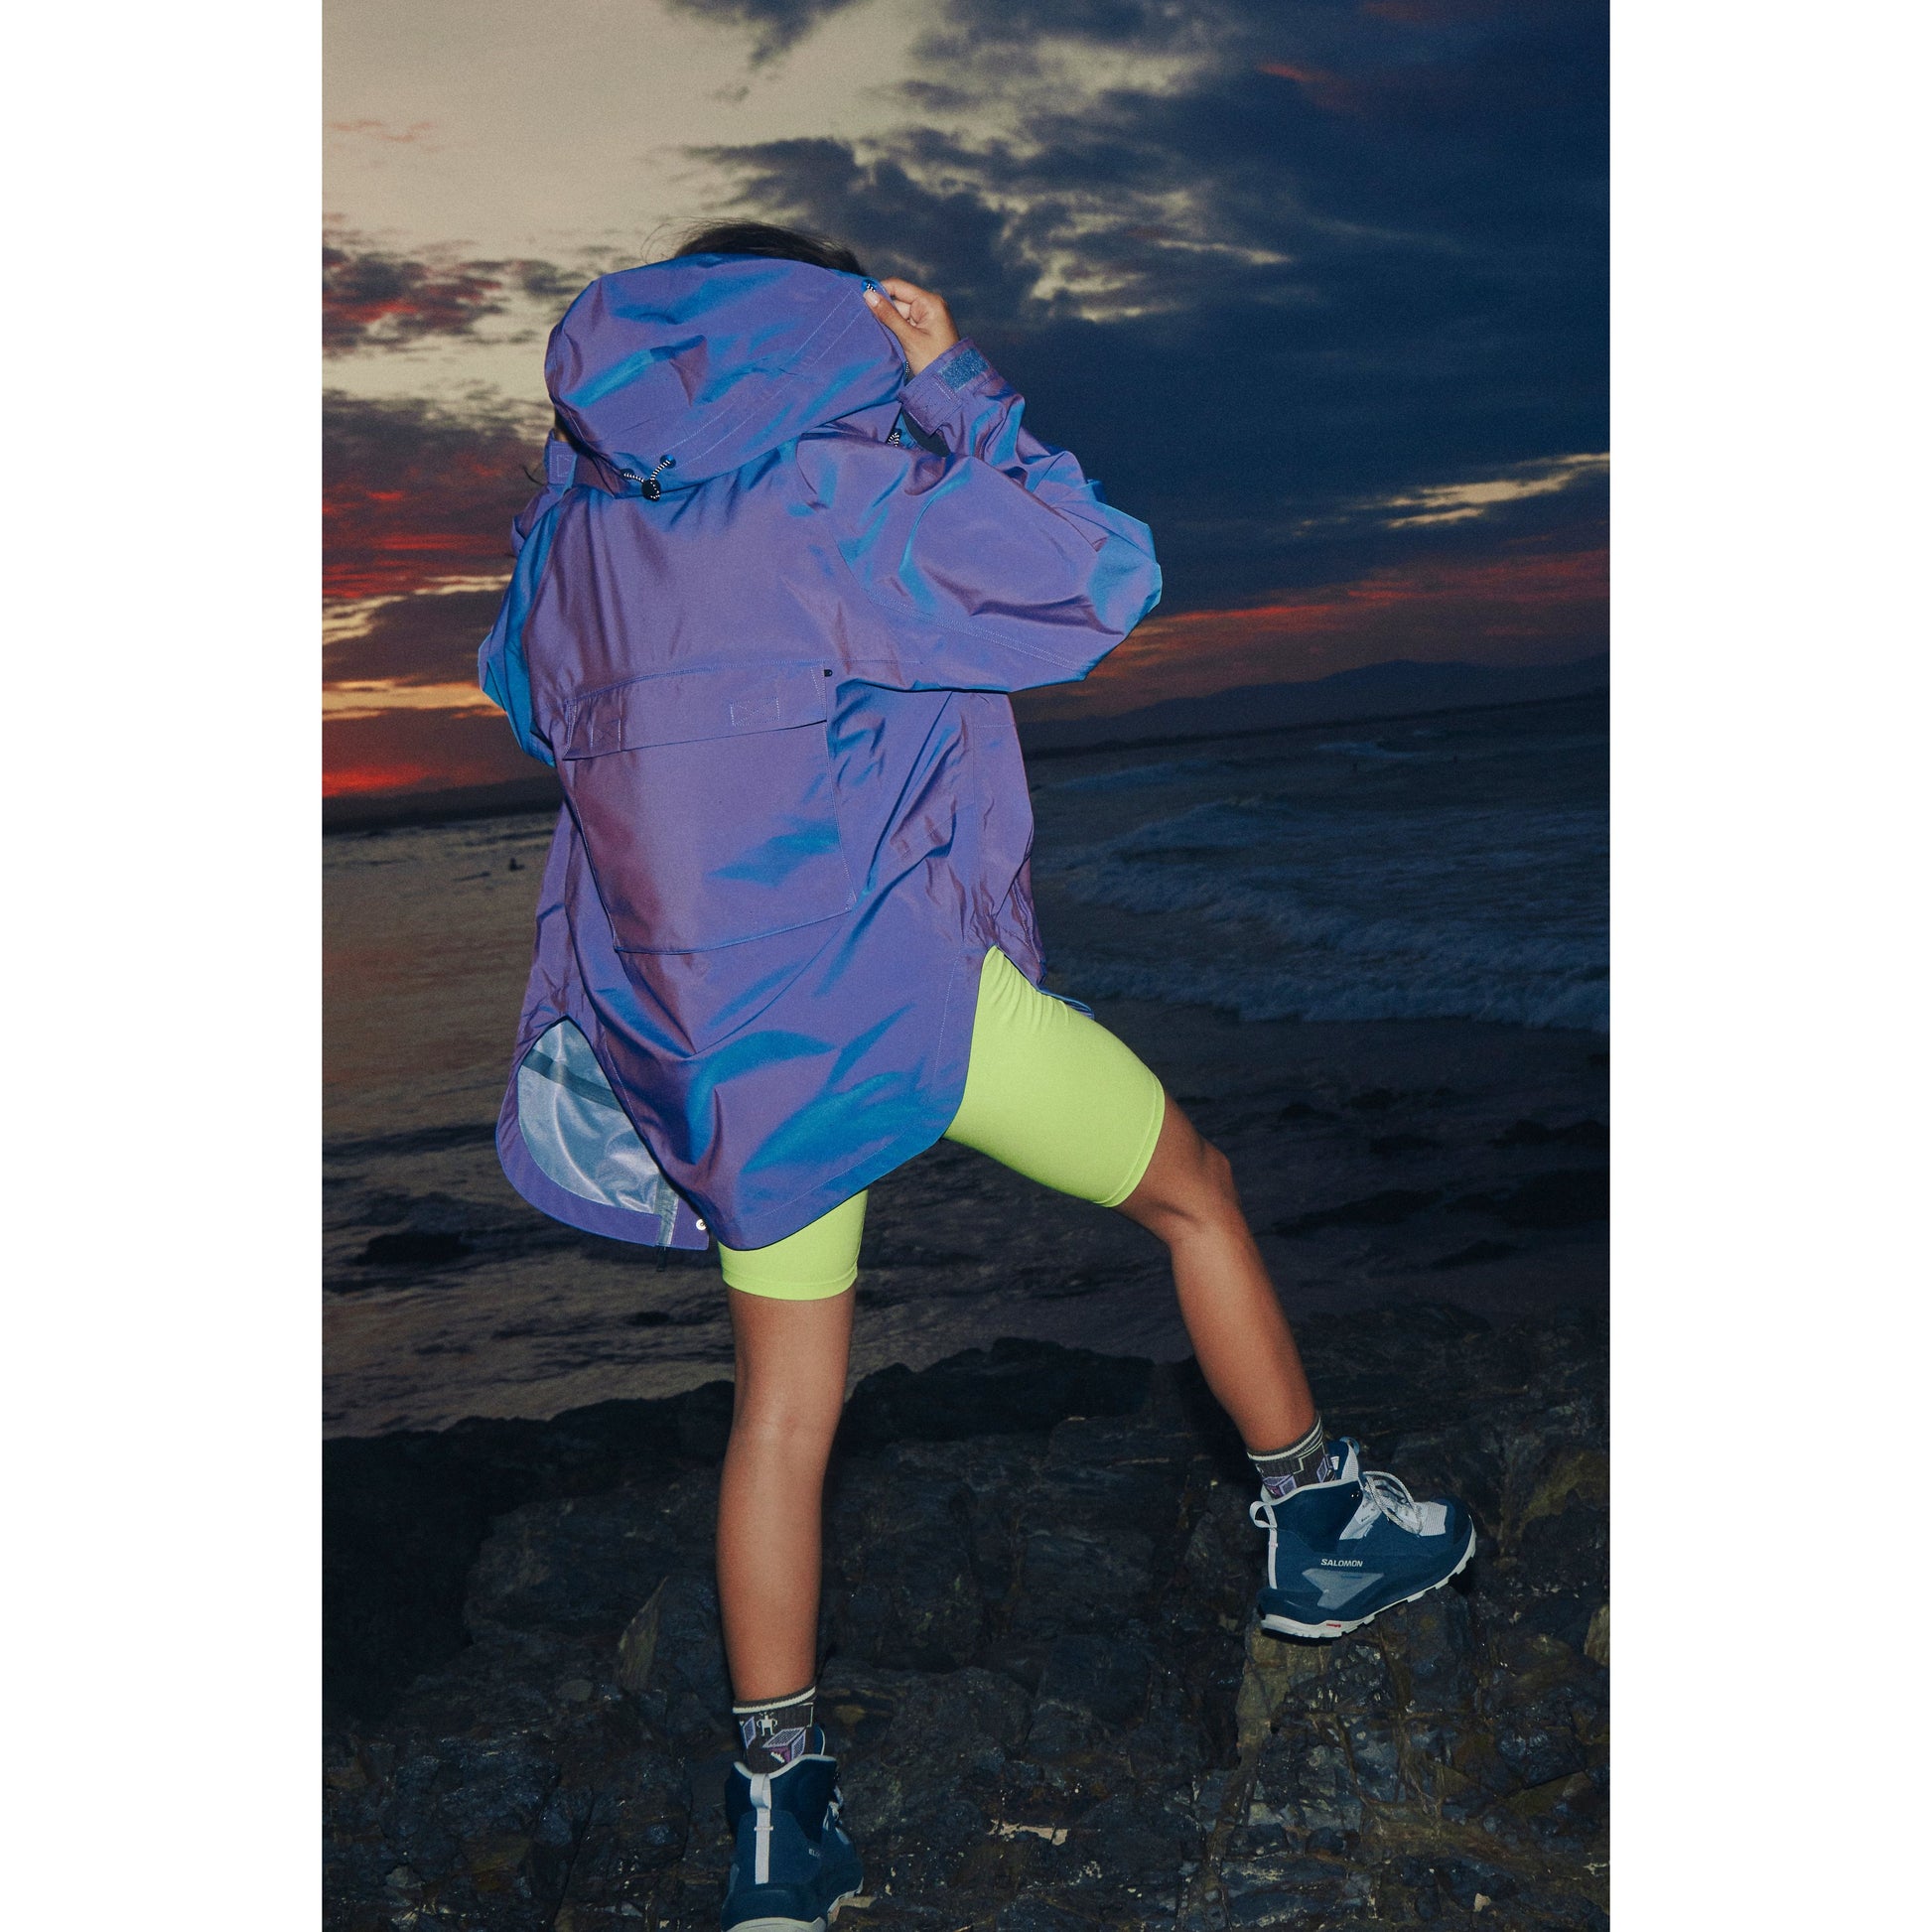 A person in a Singin in the Rain Jacket in Iridescent Blue Iris and yellow shorts poses on rocky terrain against a sunset sky.